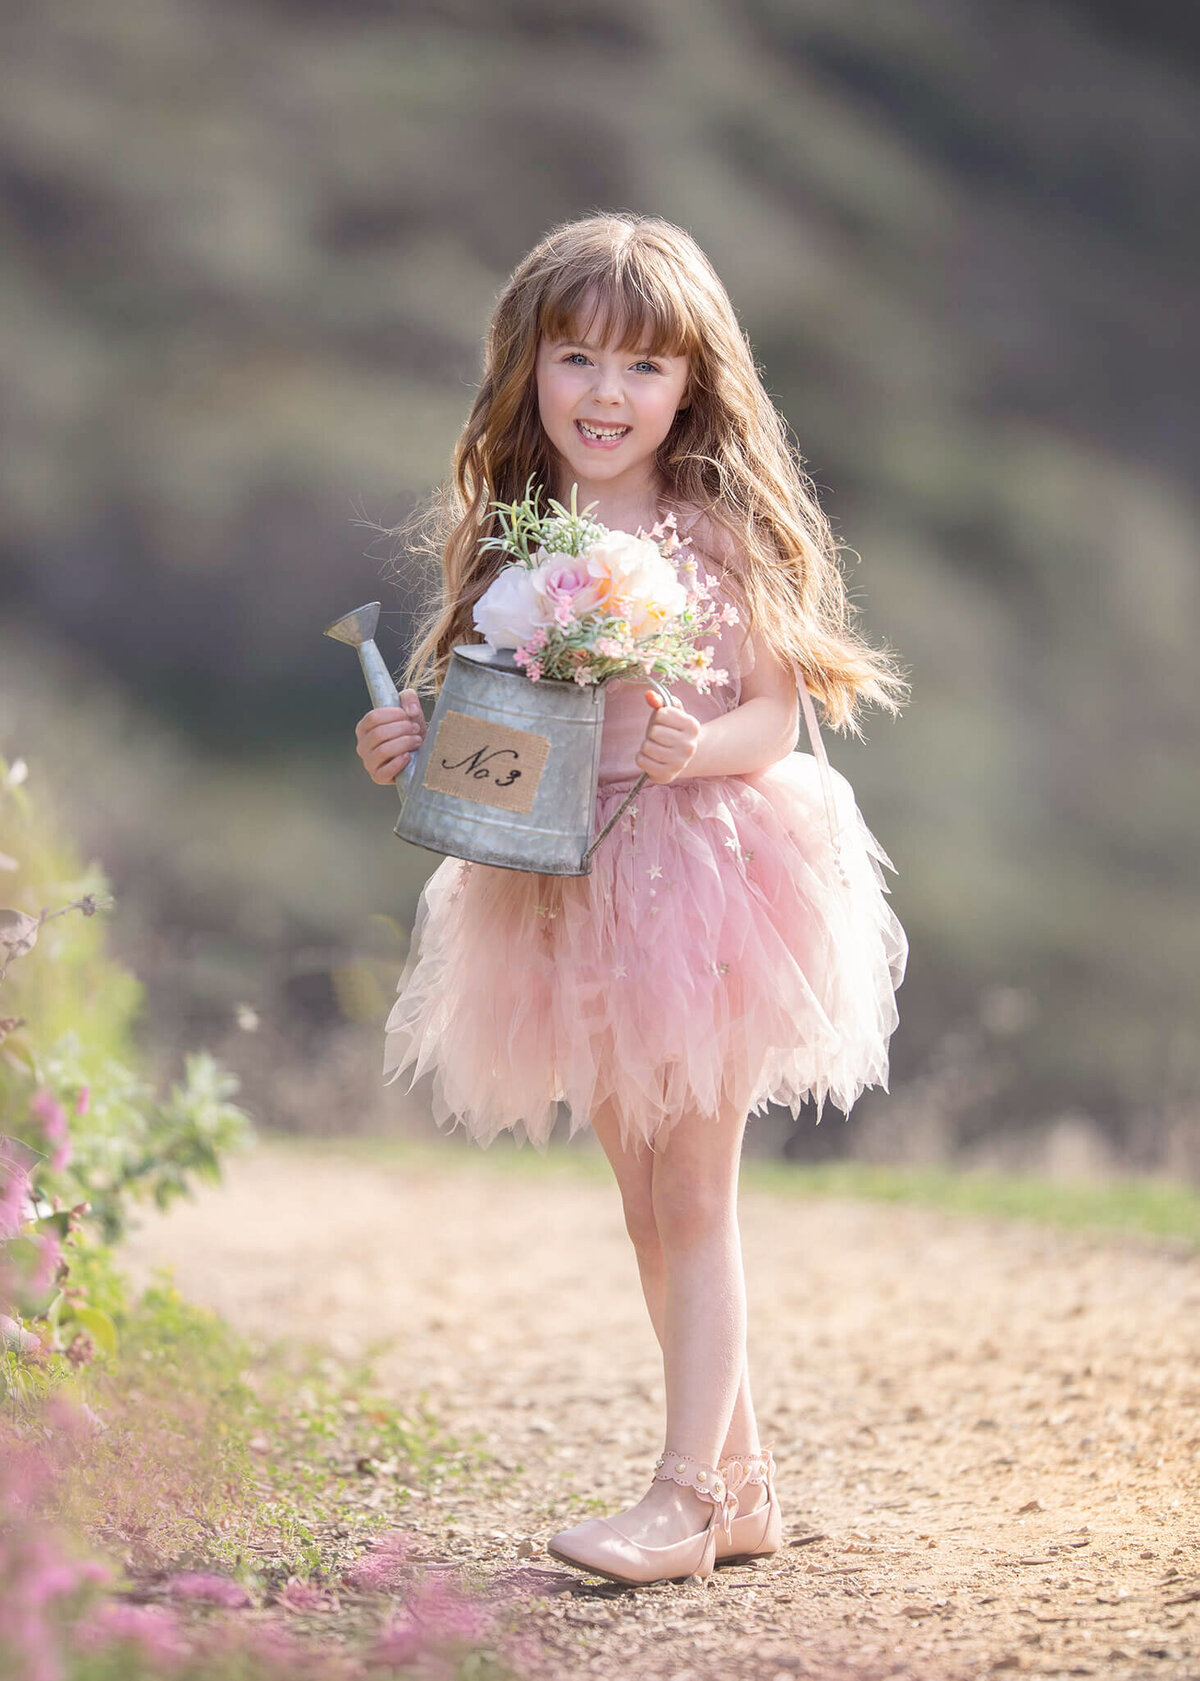 Little girl wearing pinkd ress and holding flowers in a water jug at the park - Los Angeles Children’s Photographer